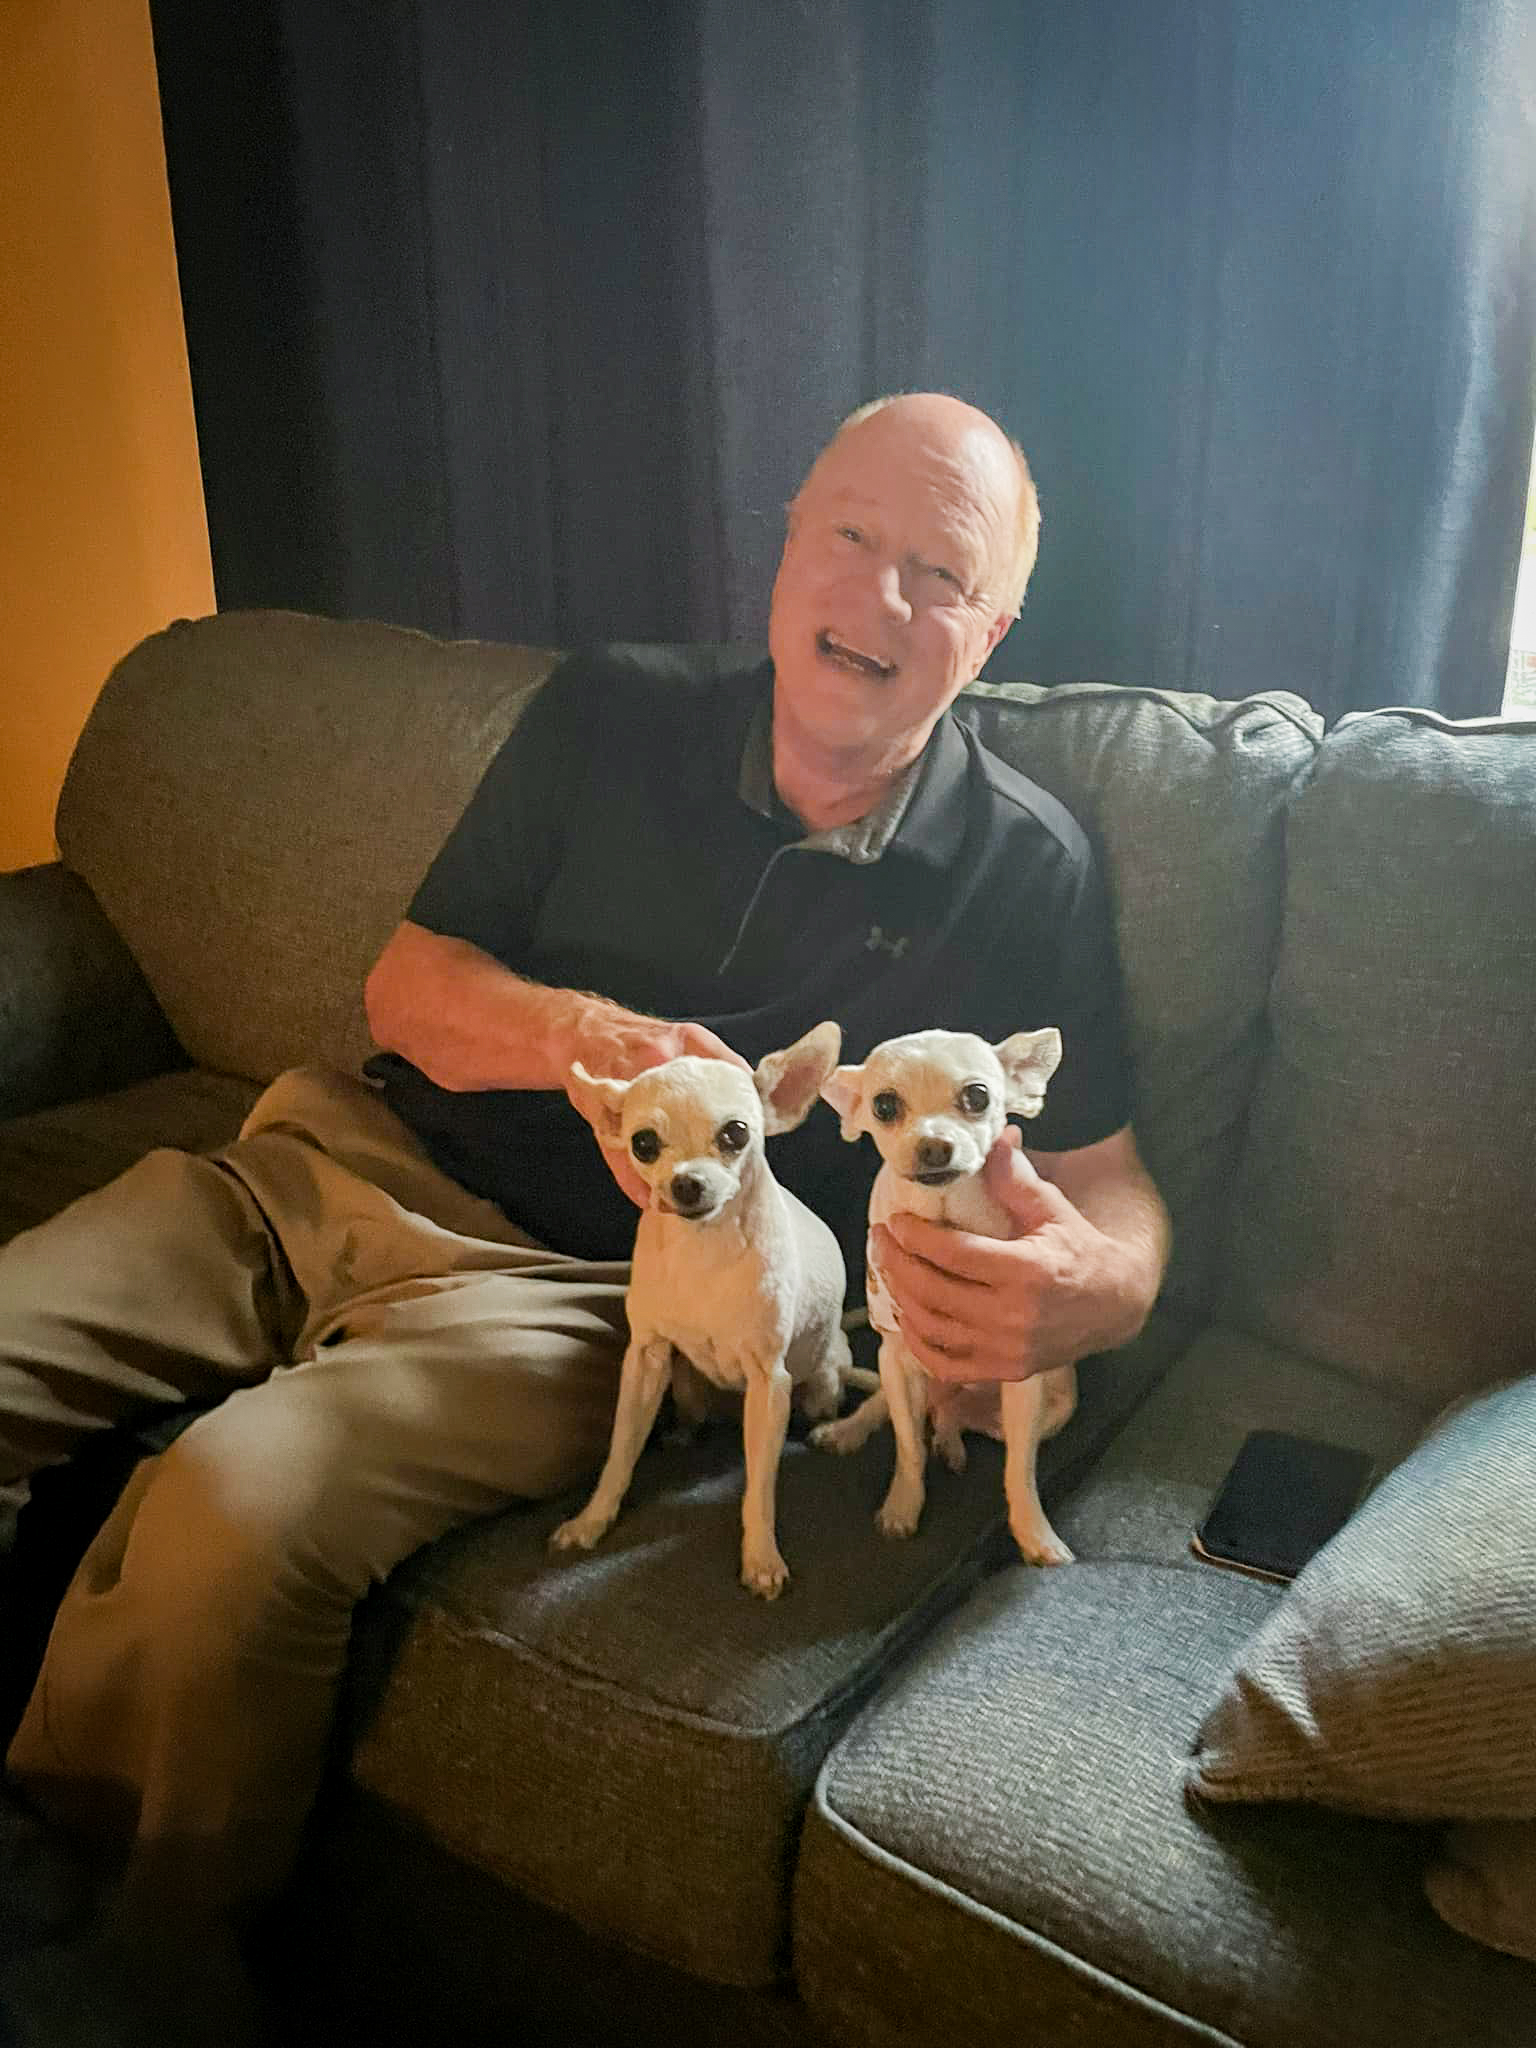 Male sitting with two dogs